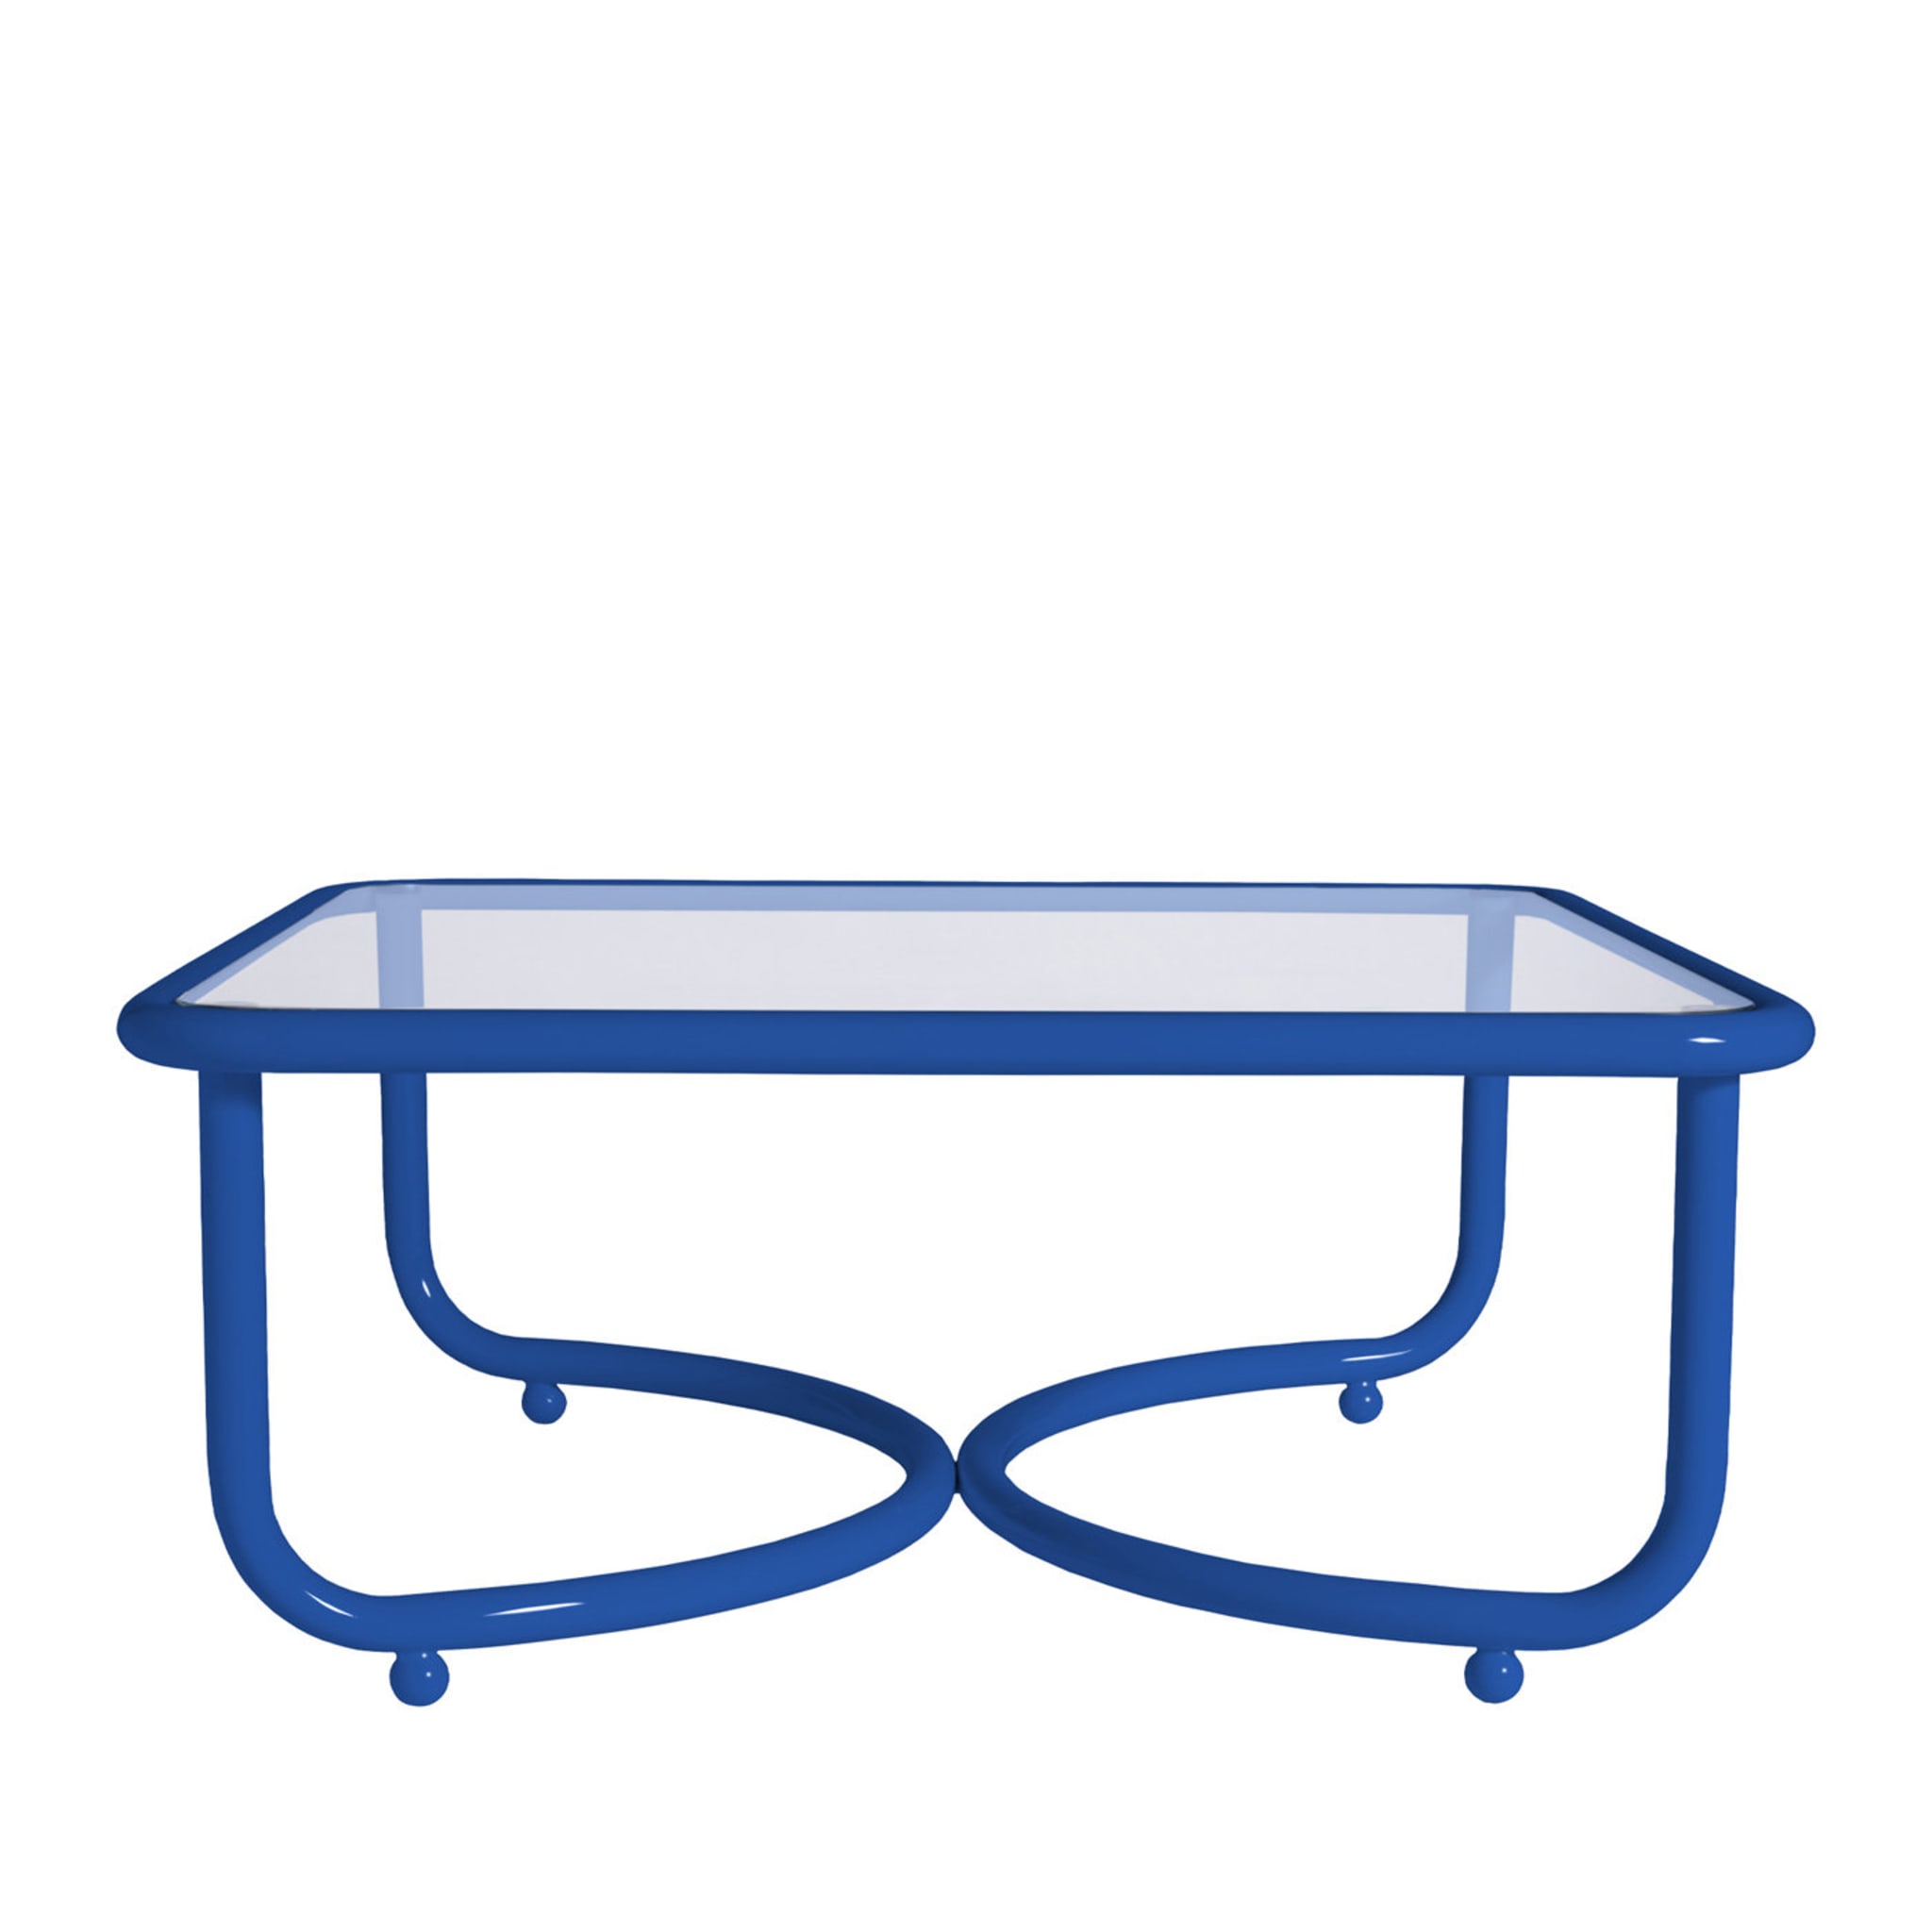 Locus Solus Blue Low Table by Gae Aulenti - Main view